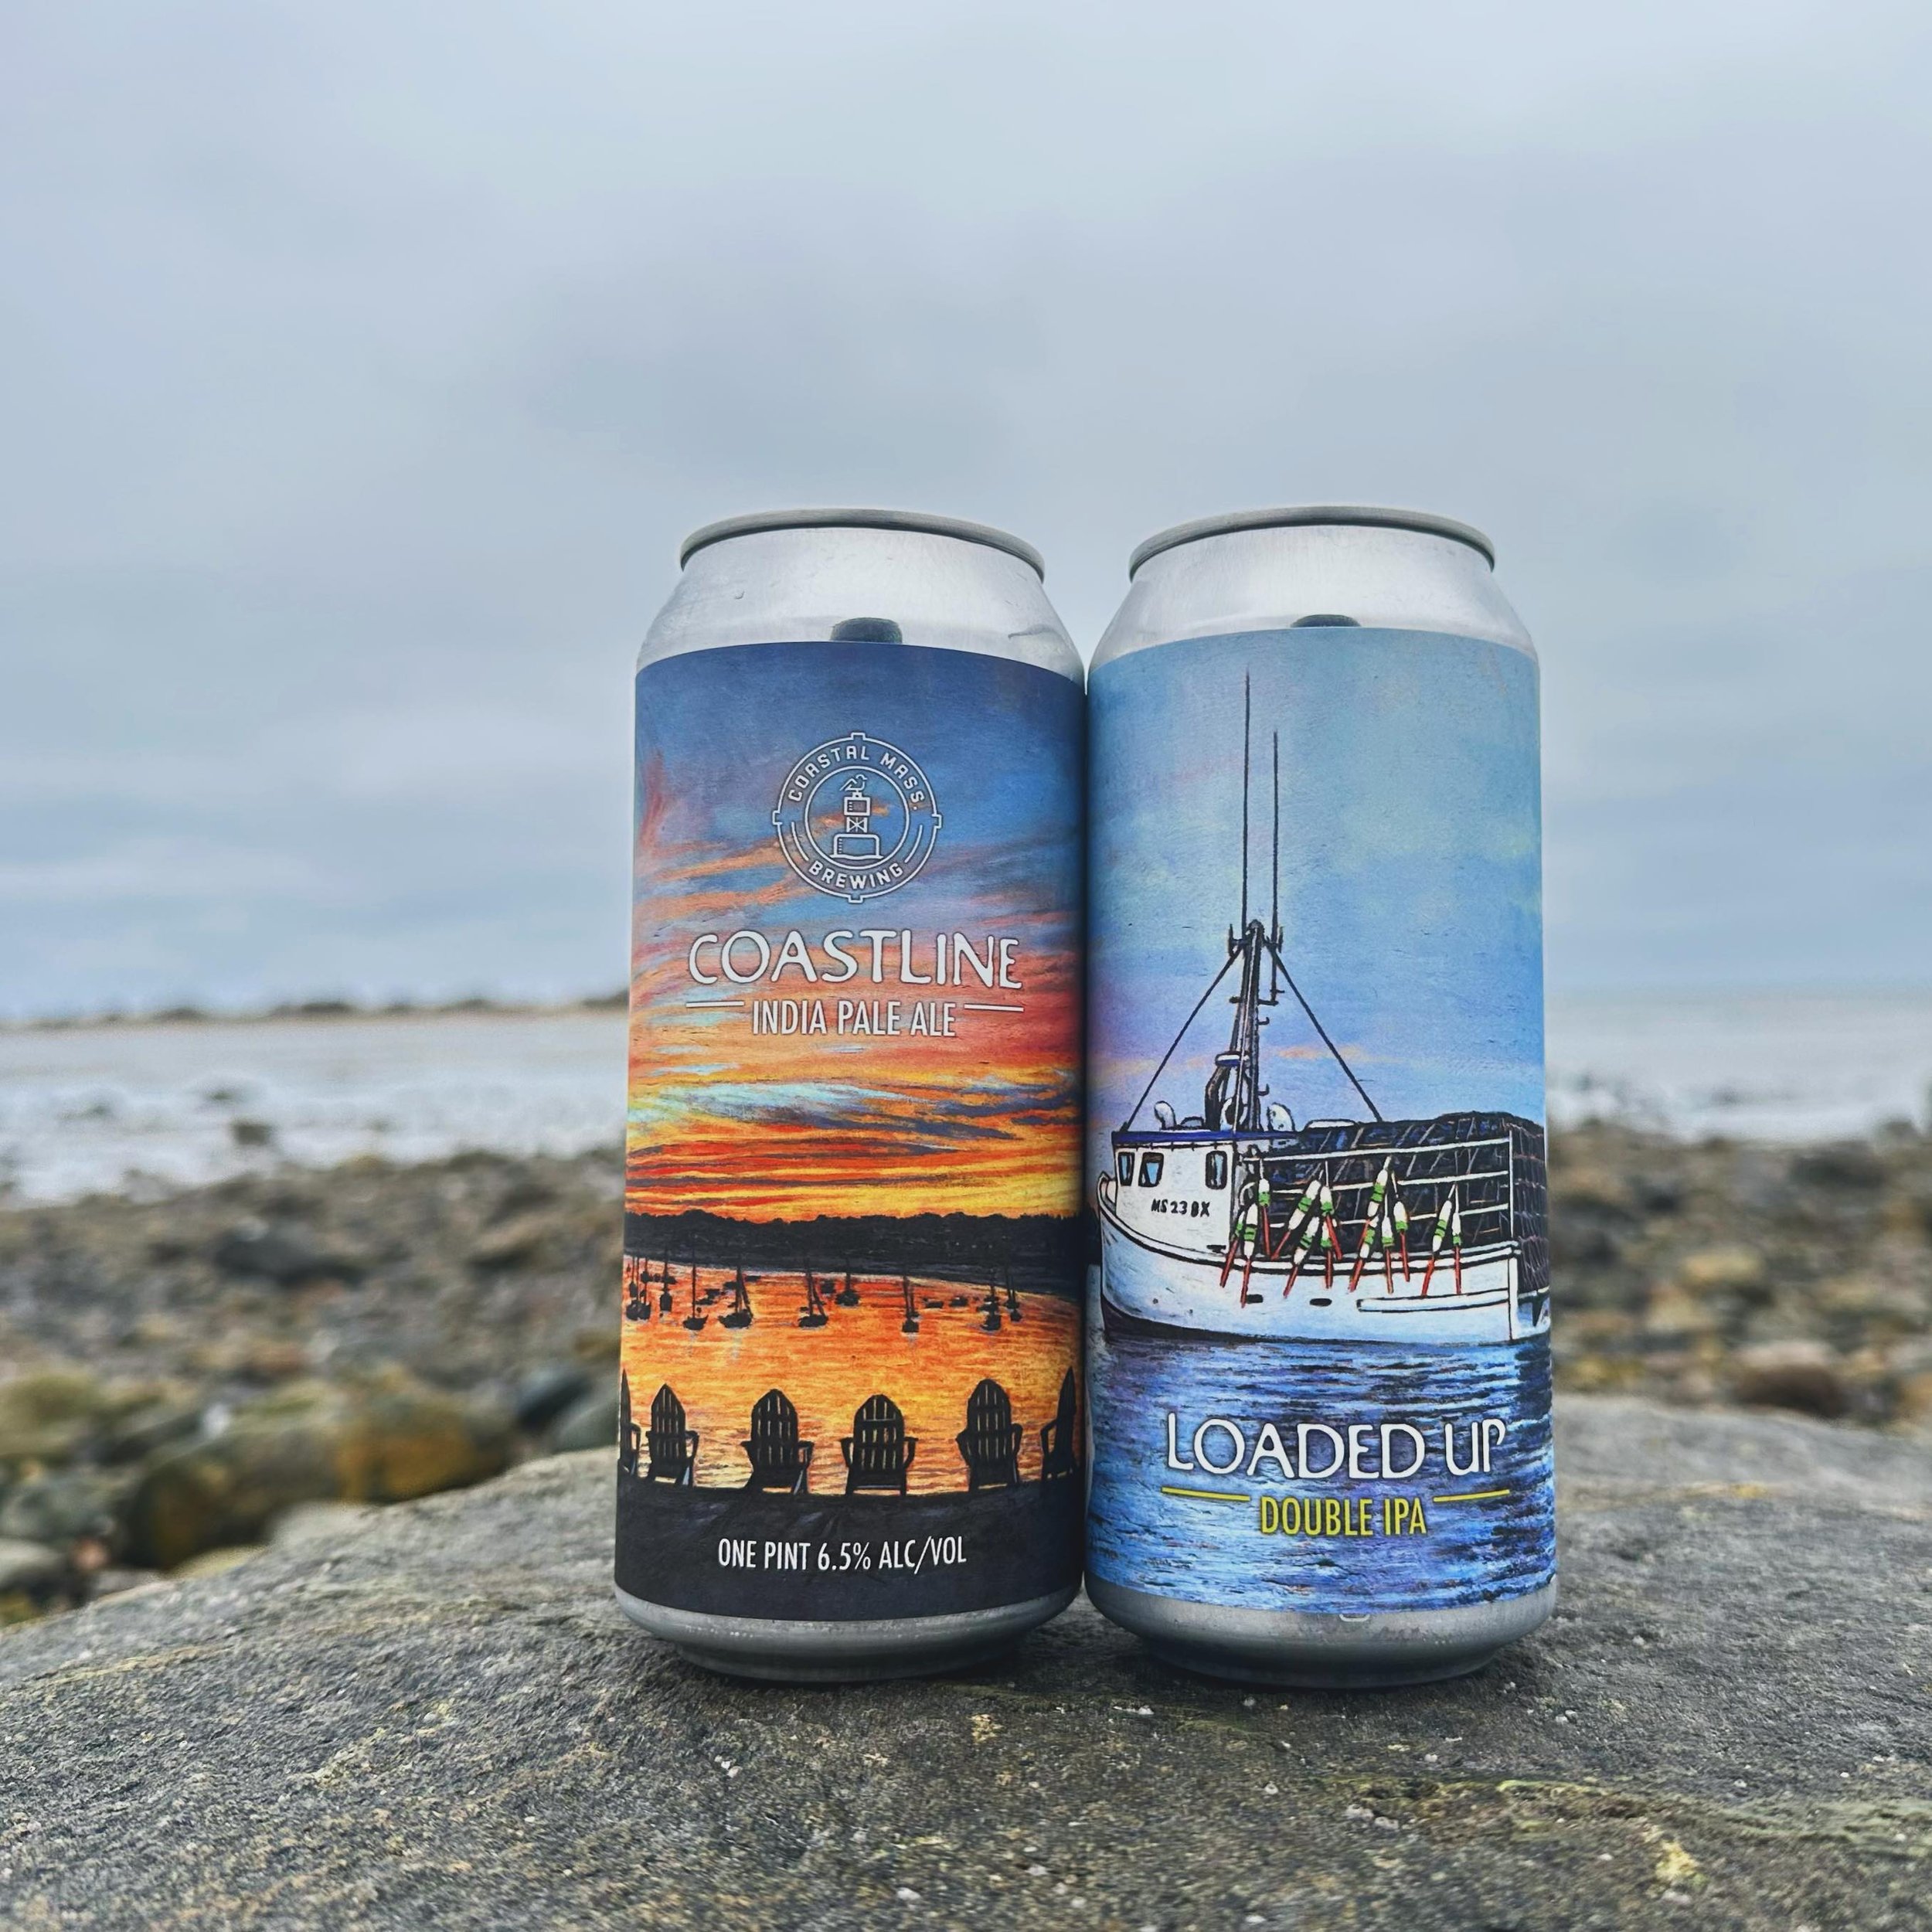 🚨FRESH BATCHES OF BEERS🚨

We have two fresh batches of IPAs for you to enjoy on this overcast Wednesday.

COASTLINE IPA🌊
New England IPA brewed with Simcoe, Citra, and HBC 586 hops. Coastline gives notes of citrus zest, mango, and passionfruit, wh